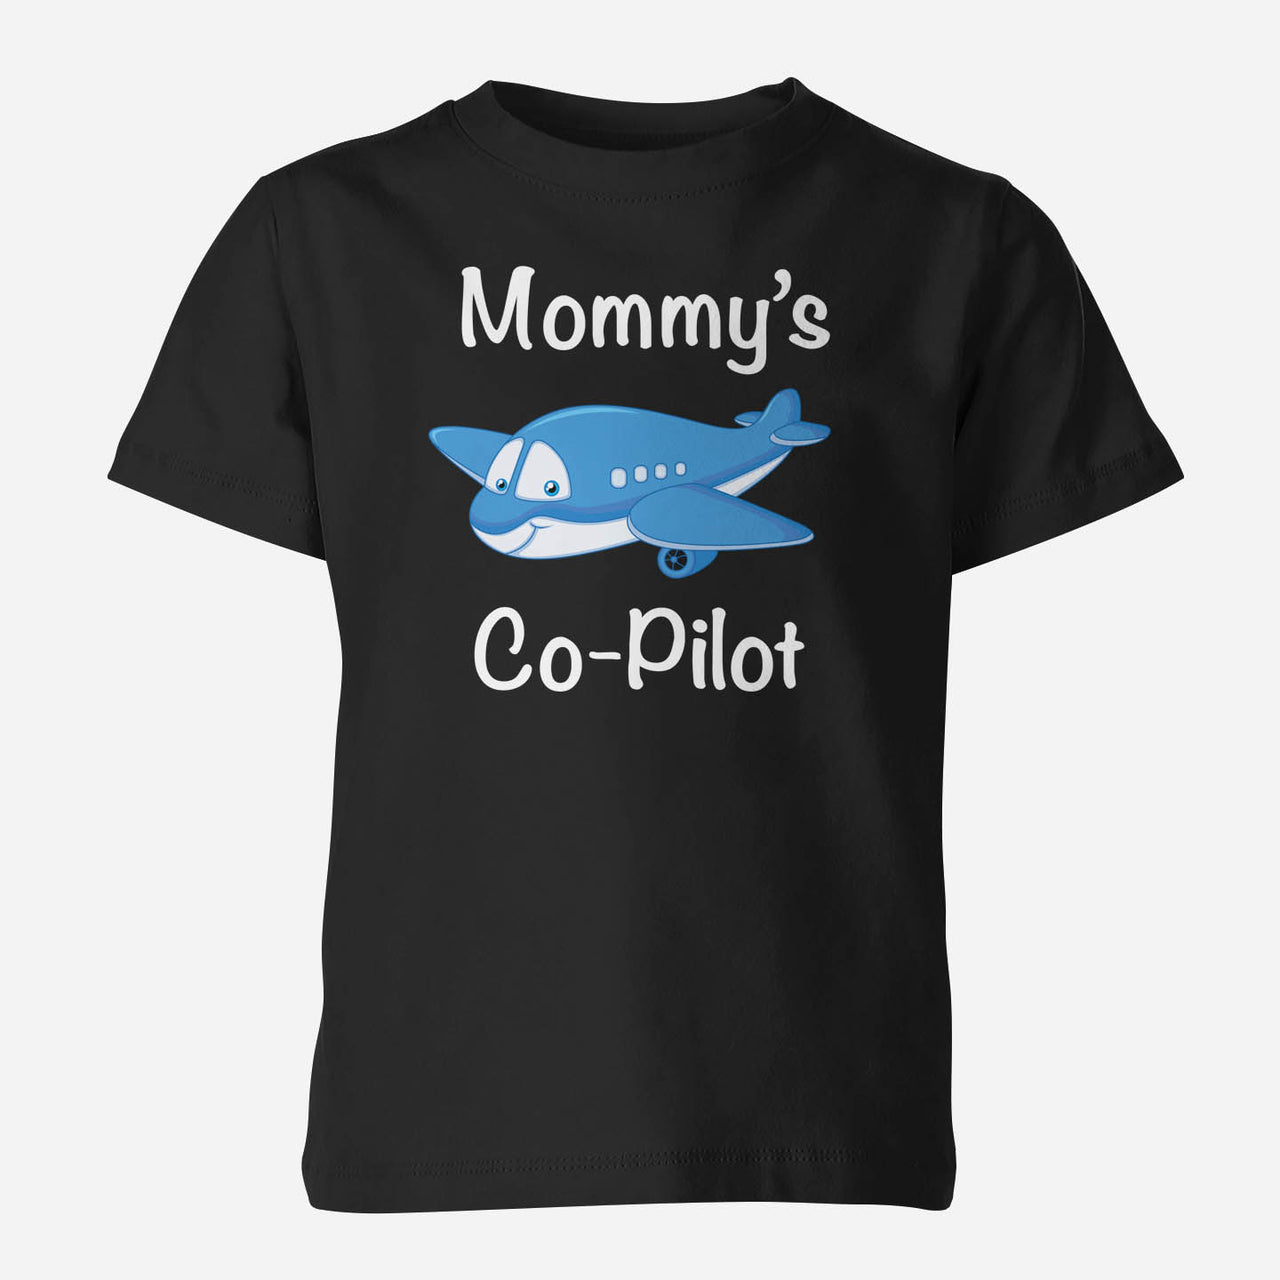 Mommy's Co-Pilot (Jet Airplane) Designed Children T-Shirts